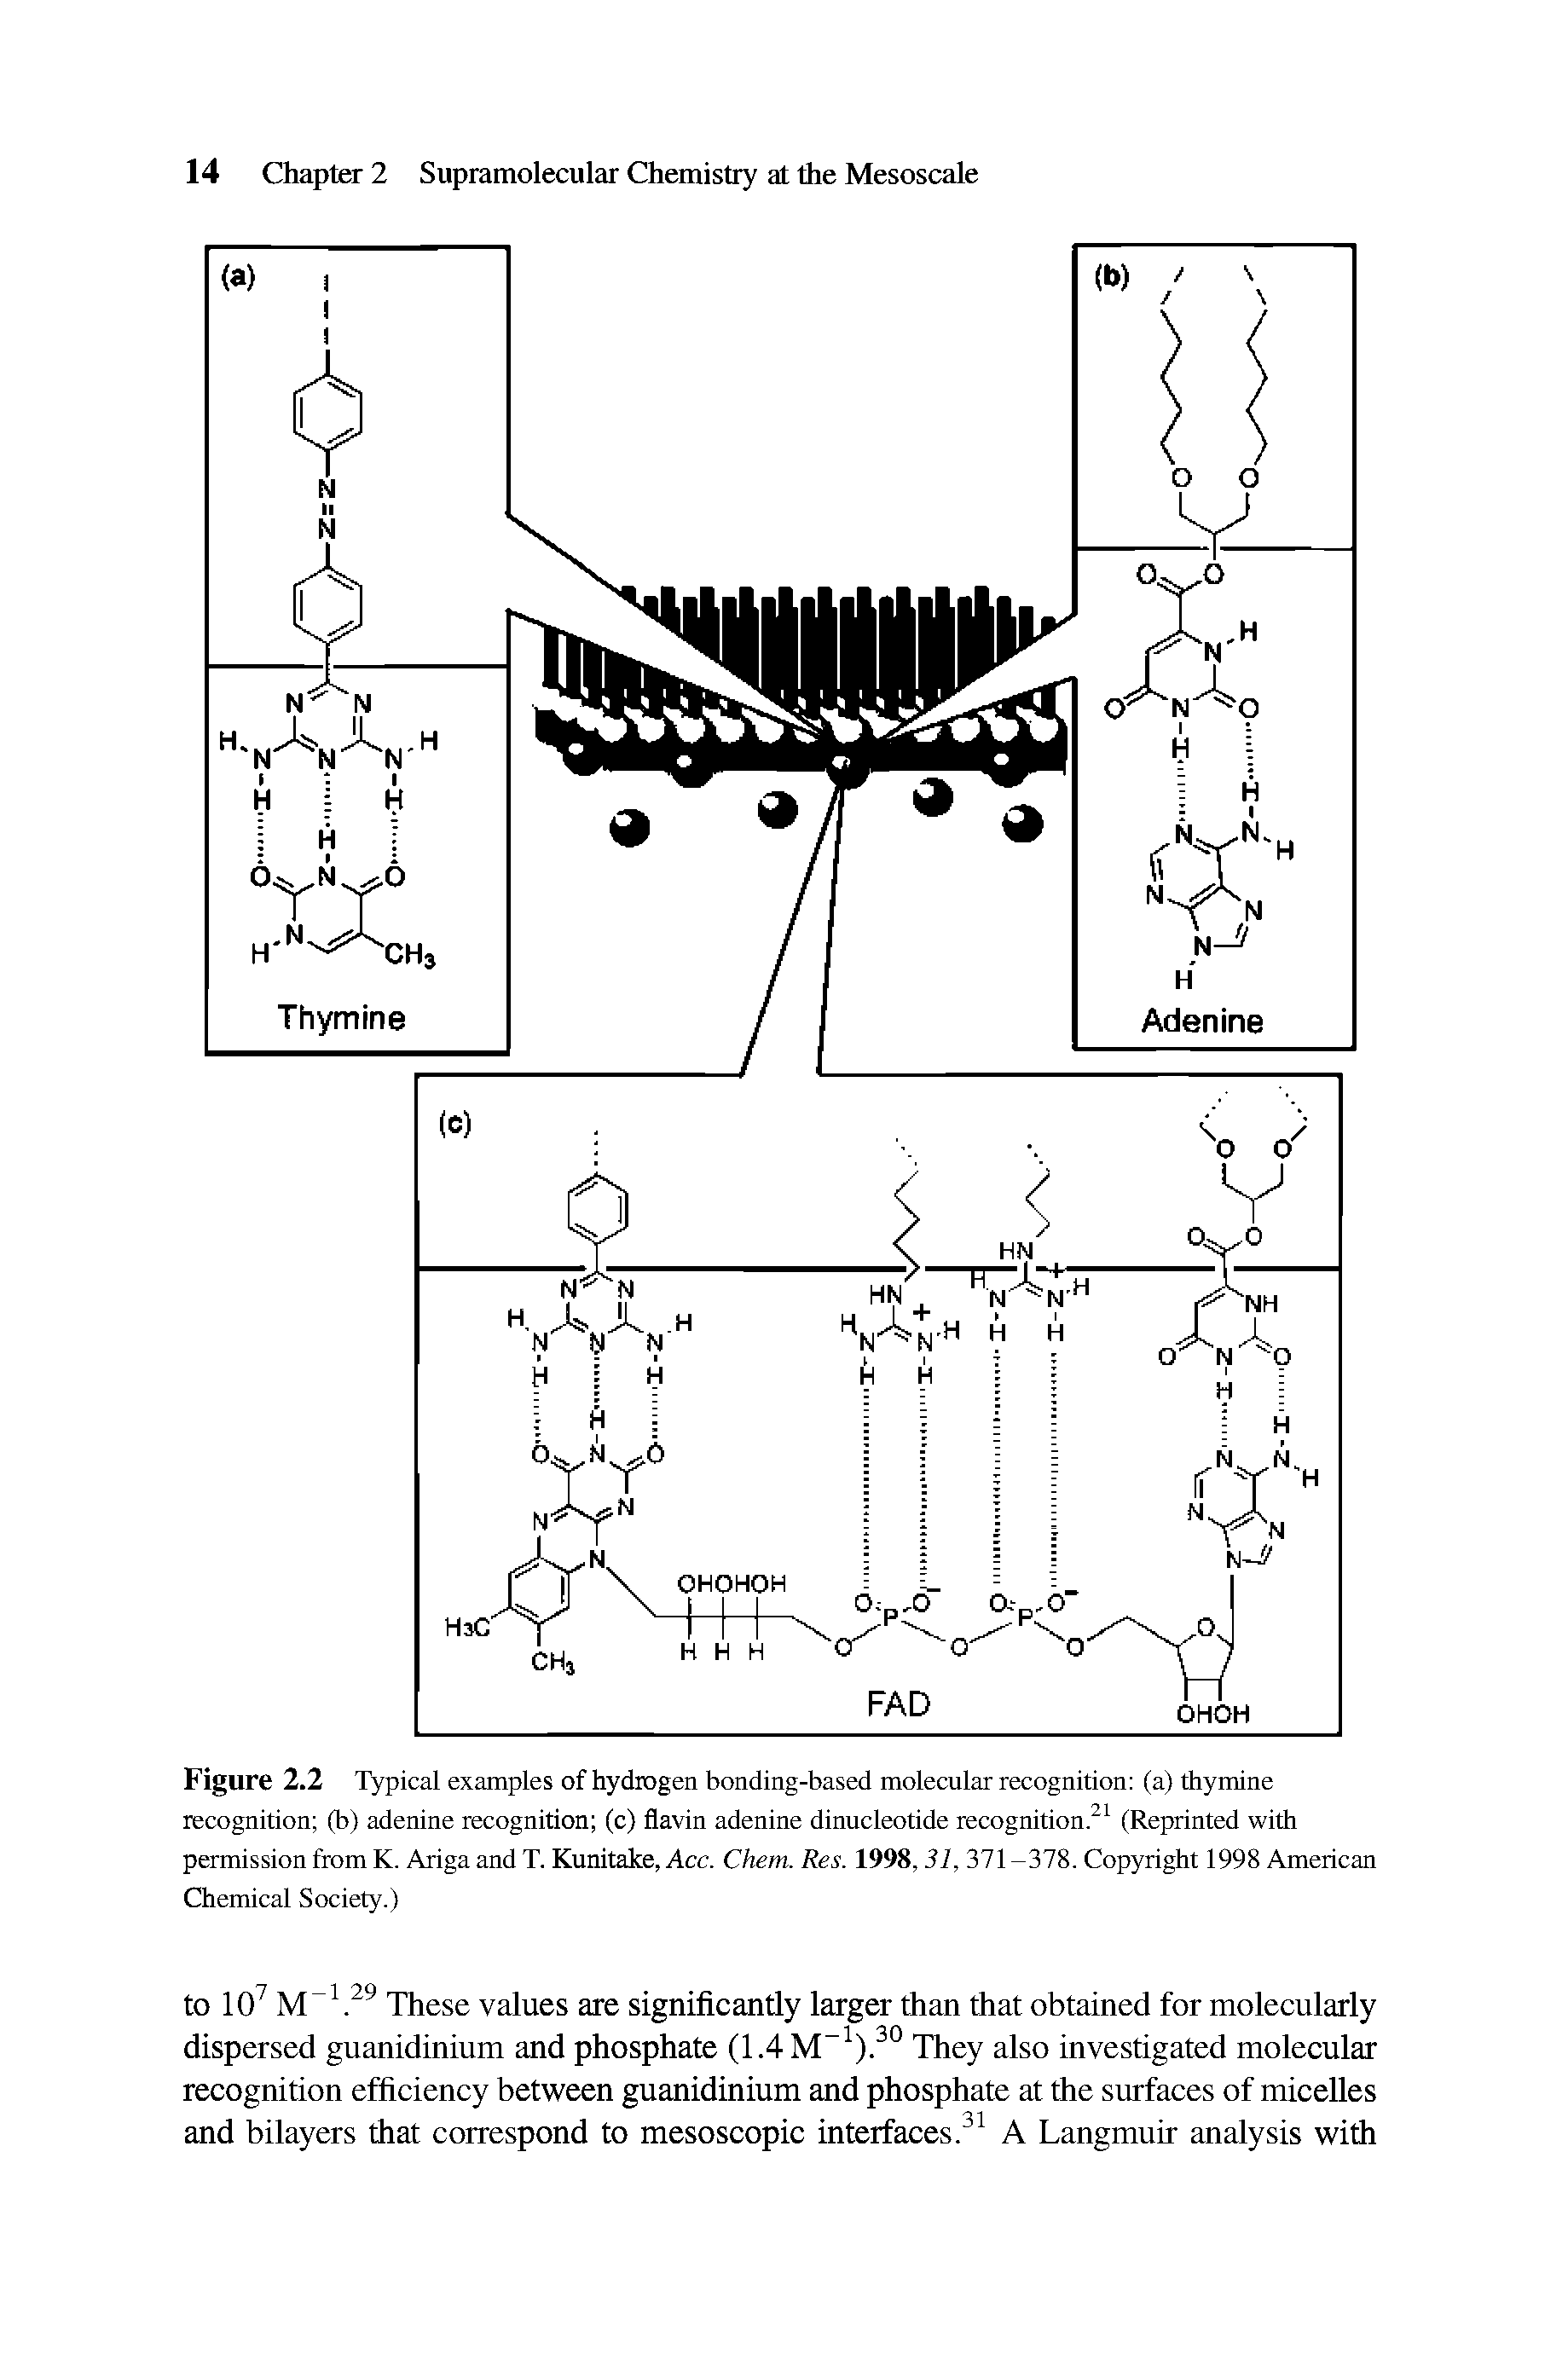 Figure 2.2 Typical examples of hydrogen bonding-based molecular recognition (a) thymine recognition (b) adenine recognition (c) flavin adenine dinucleotide recognition.21 (Reprinted with permission from K. Ariga and T. Kunitake, Acc. Chem. Res. 1998,31, 371-378. Copyright 1998 American Chemical Society.)...